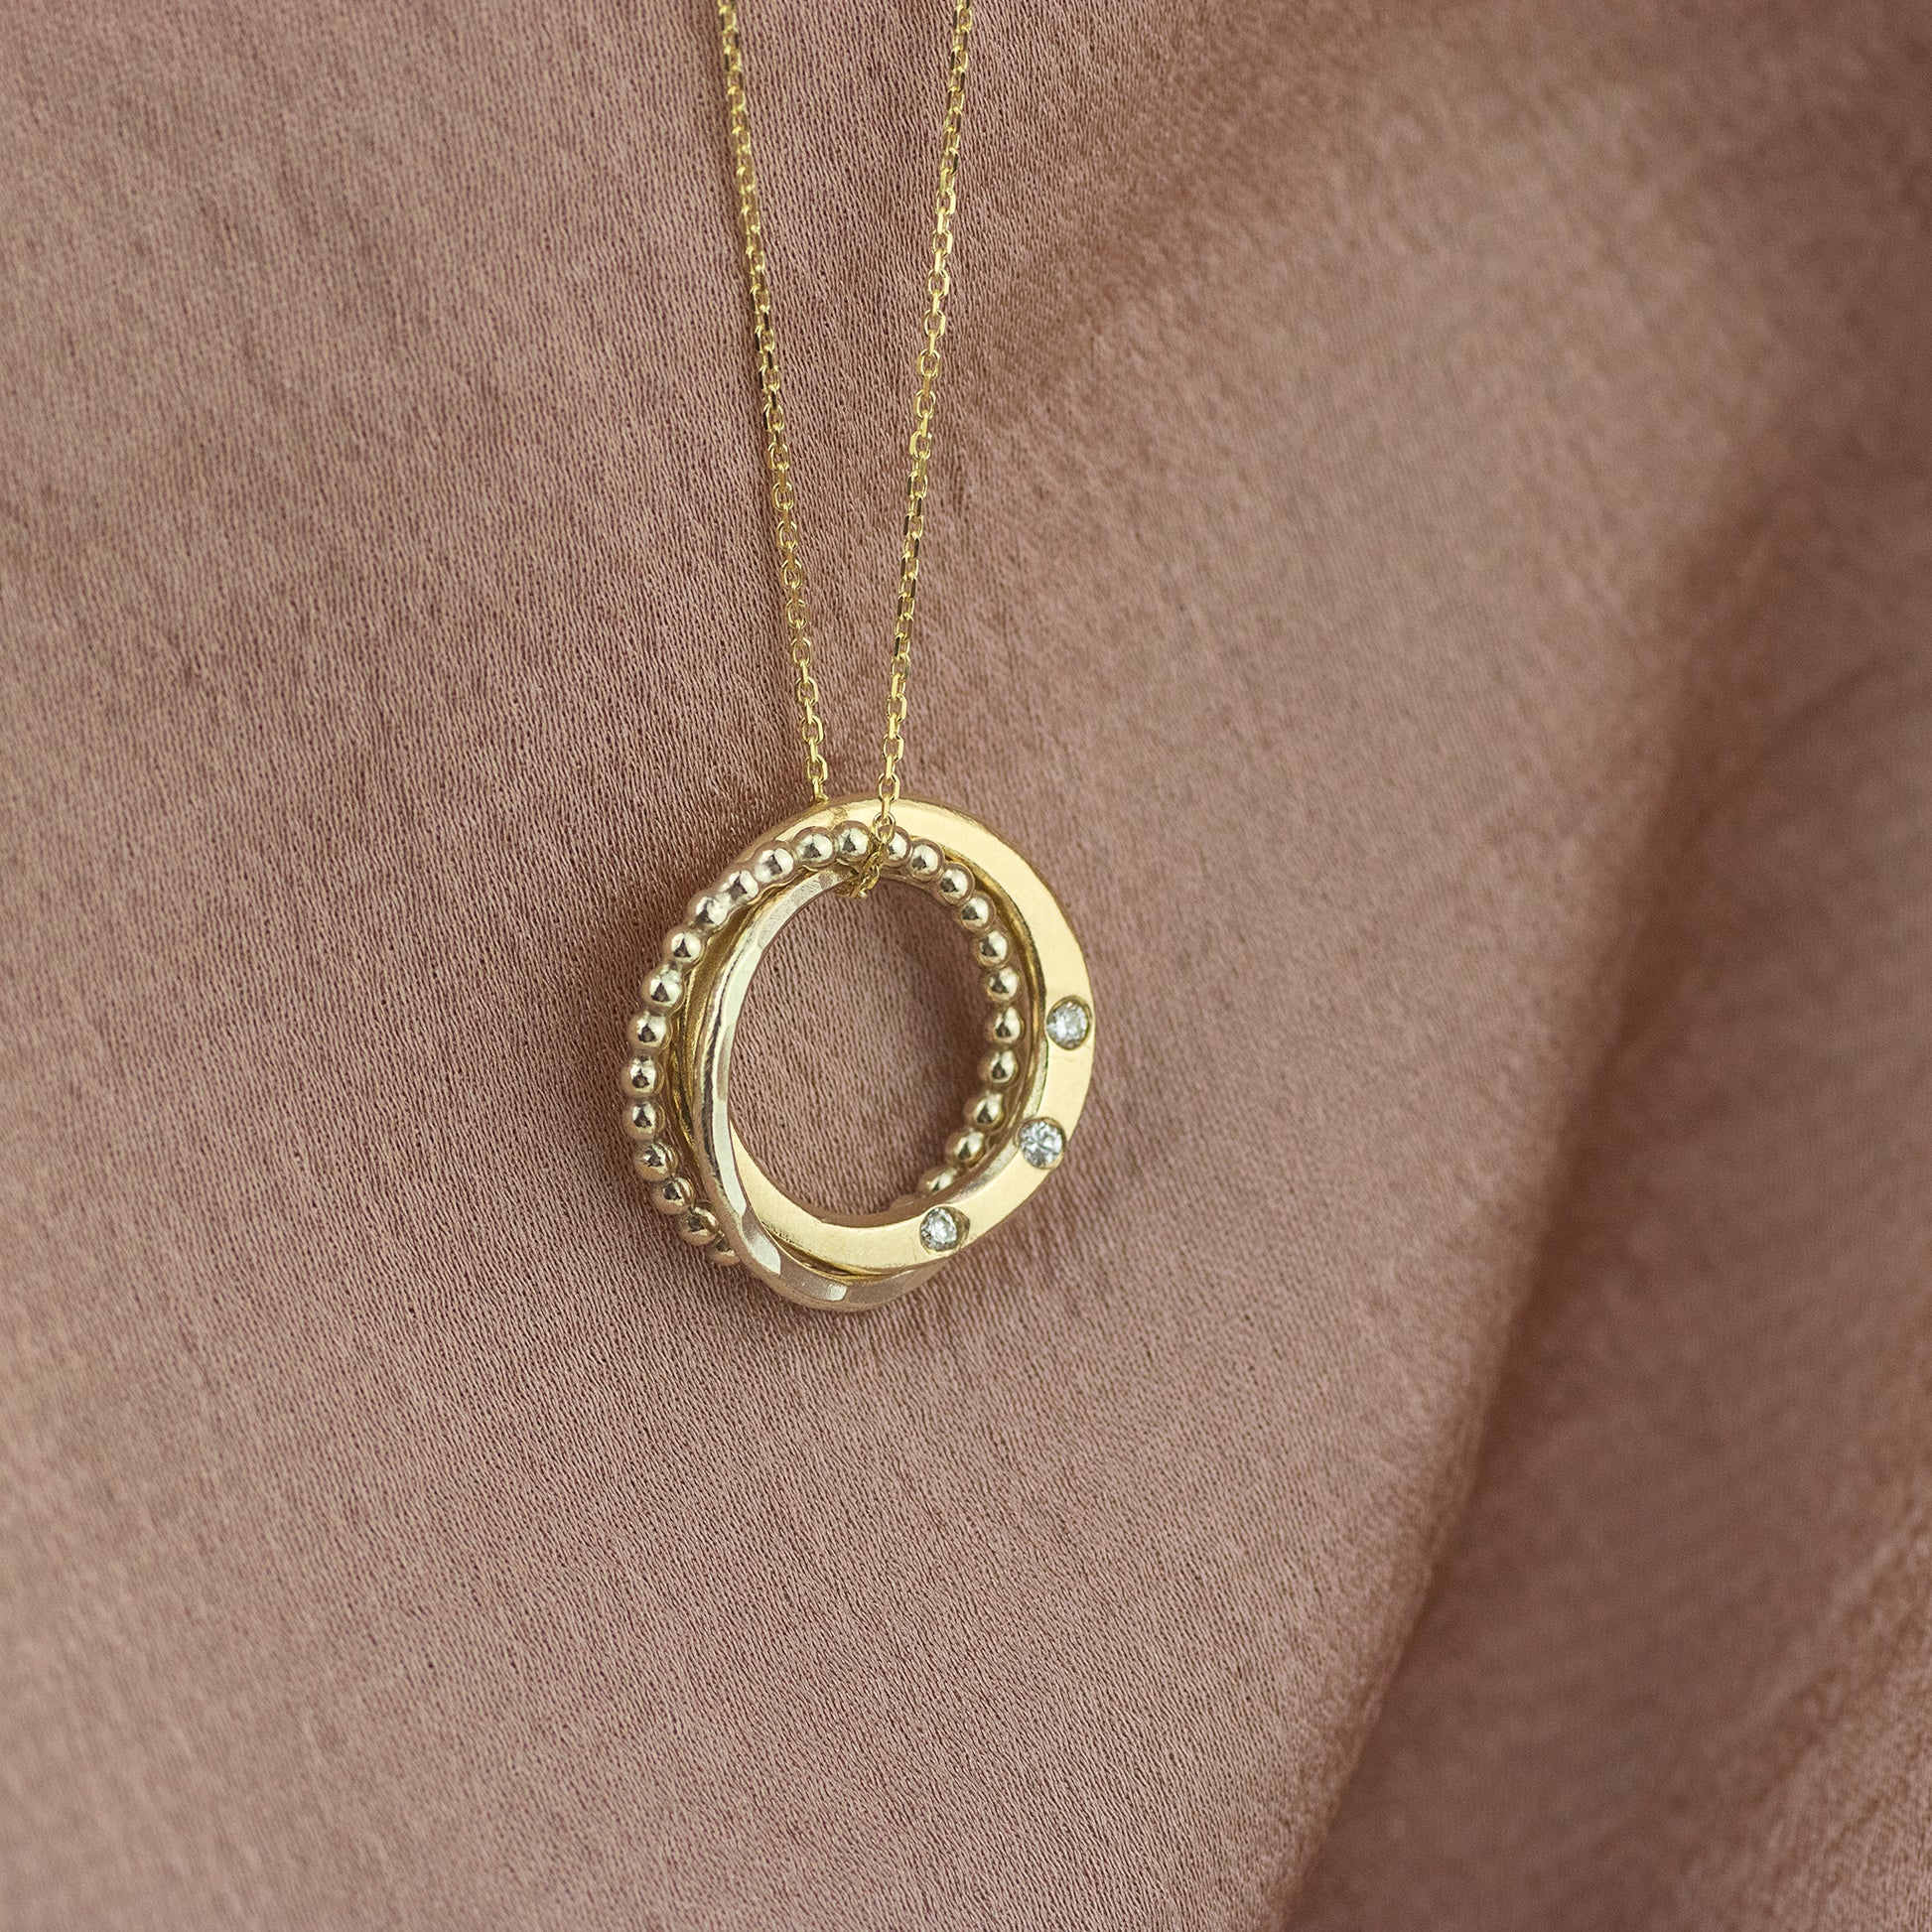 Gift for Mum-To-Be From Husband - 9kt Gold Necklace - 3 Diamond for 3 Loved ones